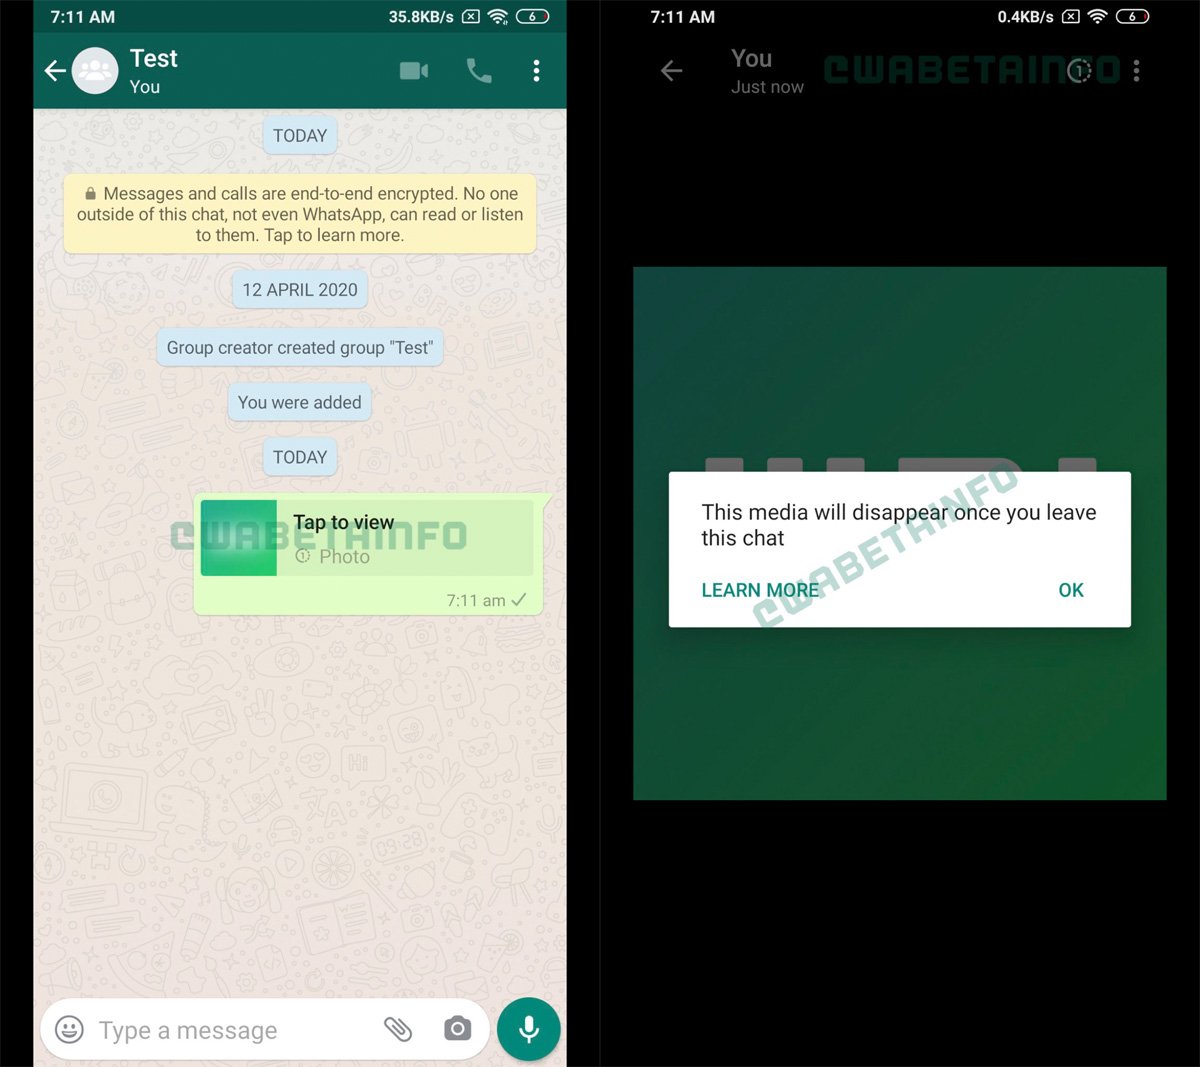 WhatsApp Working on Disappearing Images Feature